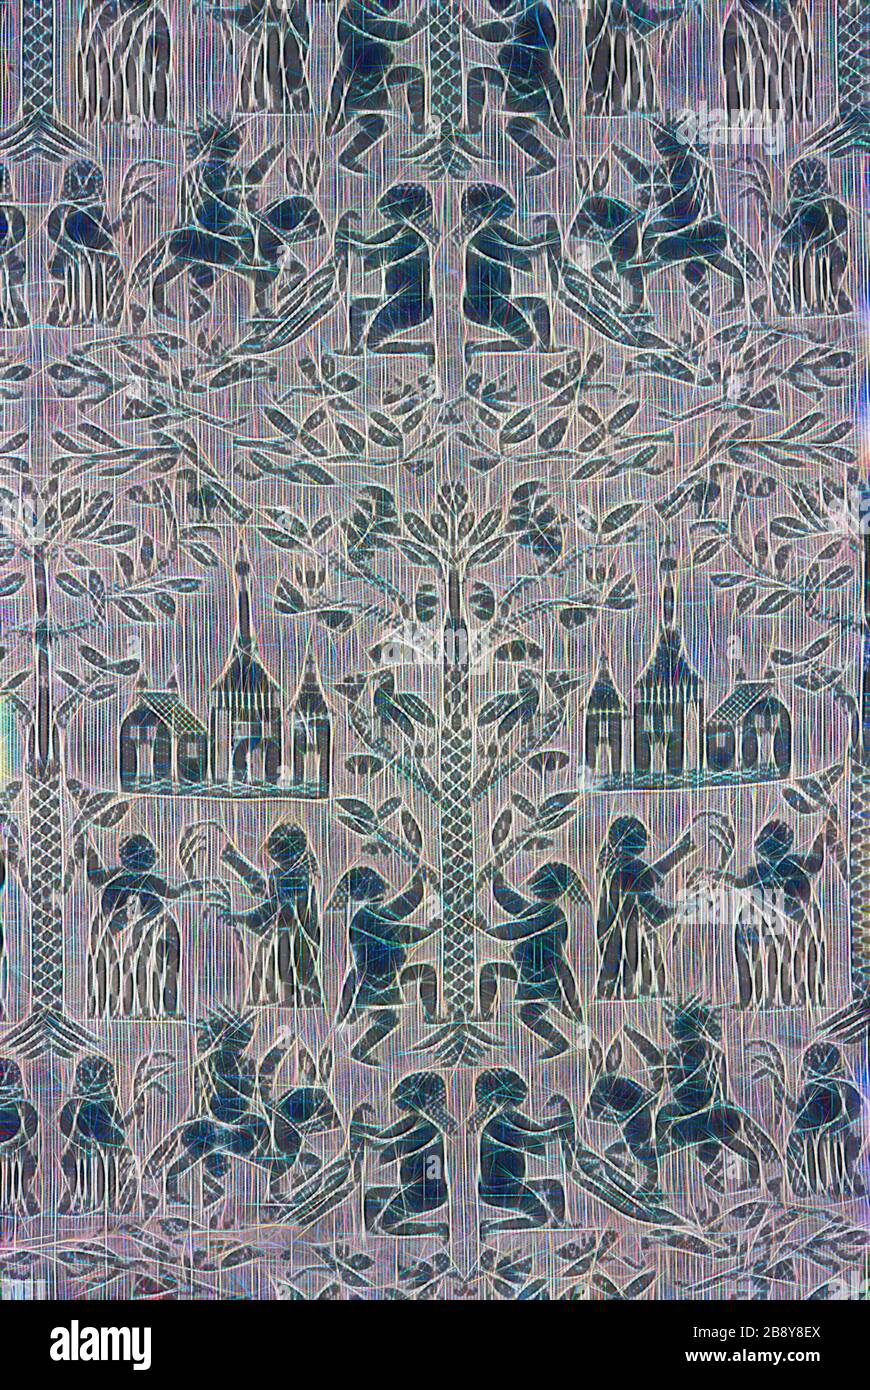 Panel Showing Christ’s Entrance into Jerusalem, 17th century, Germany, Schleswig-Holstein (from North Friesland, Bredstedt), Schleswig-Holstein, Linen and wool, plain weave, tied and free double cloth, 143.9 x 81.7 cm (56 5/8 x 32 1/8 in.), Reimagined by Gibon, design of warm cheerful glowing of brightness and light rays radiance. Classic art reinvented with a modern twist. Photography inspired by futurism, embracing dynamic energy of modern technology, movement, speed and revolutionize culture. Stock Photo